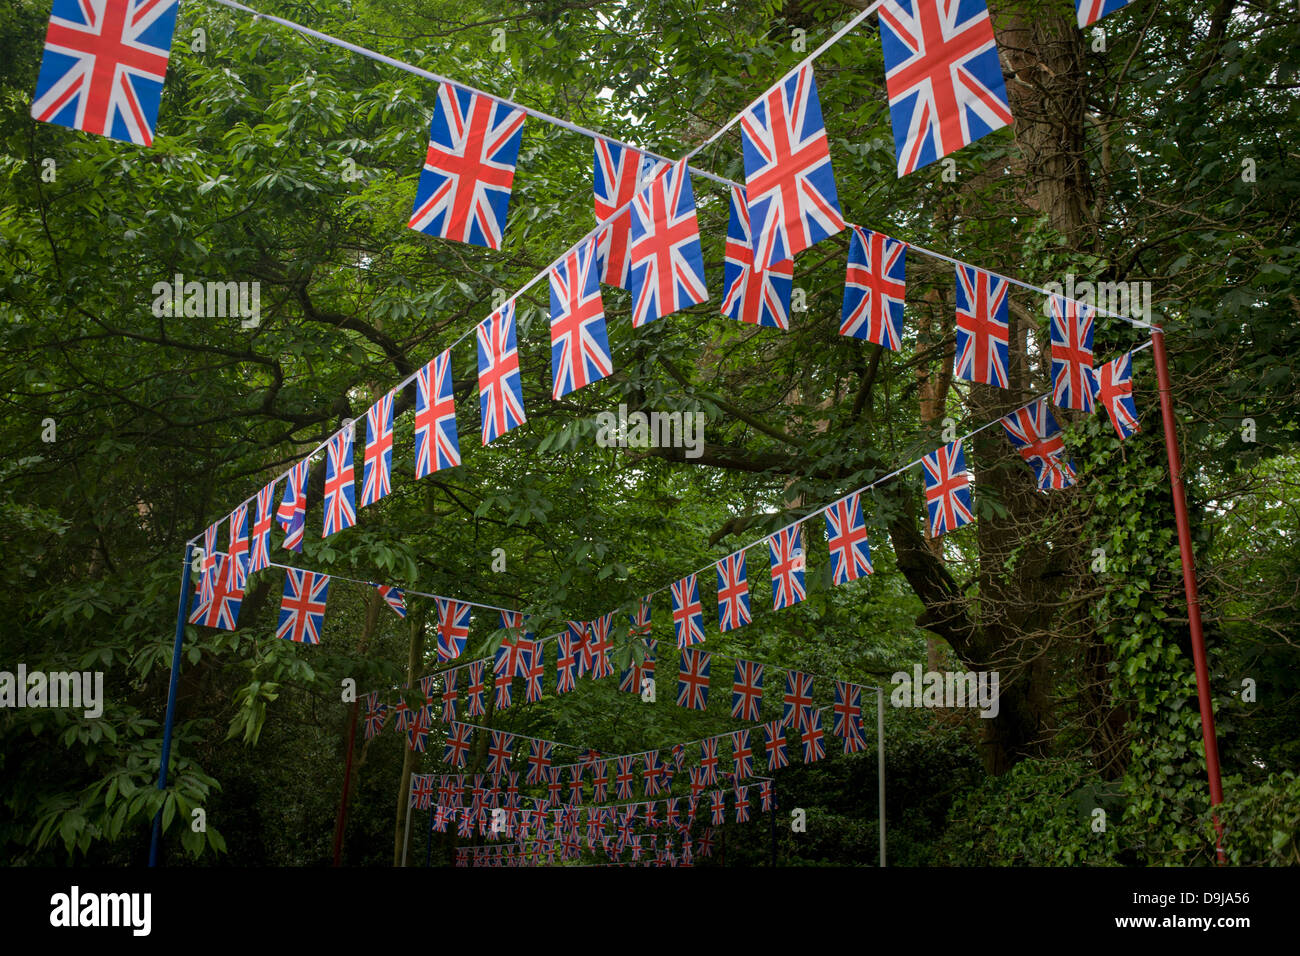 Hundreds of union jack flag bunting stretches back downhill through woods towards the local station during the annual Royal Ascot horseracing festival in Berkshire, England. Royal Ascot is one of Europe's most famous race meetings, and dates back to 1711. Queen Elizabeth and various members of the British Royal Family attend. Held every June, it's one of the main dates on the English sporting calendar and summer social season. Over 300,000 people make the annual visit to Berkshire during Royal Ascot week, making this Europe’s best-attended race meeting with over £3m prize money to be won. Stock Photo